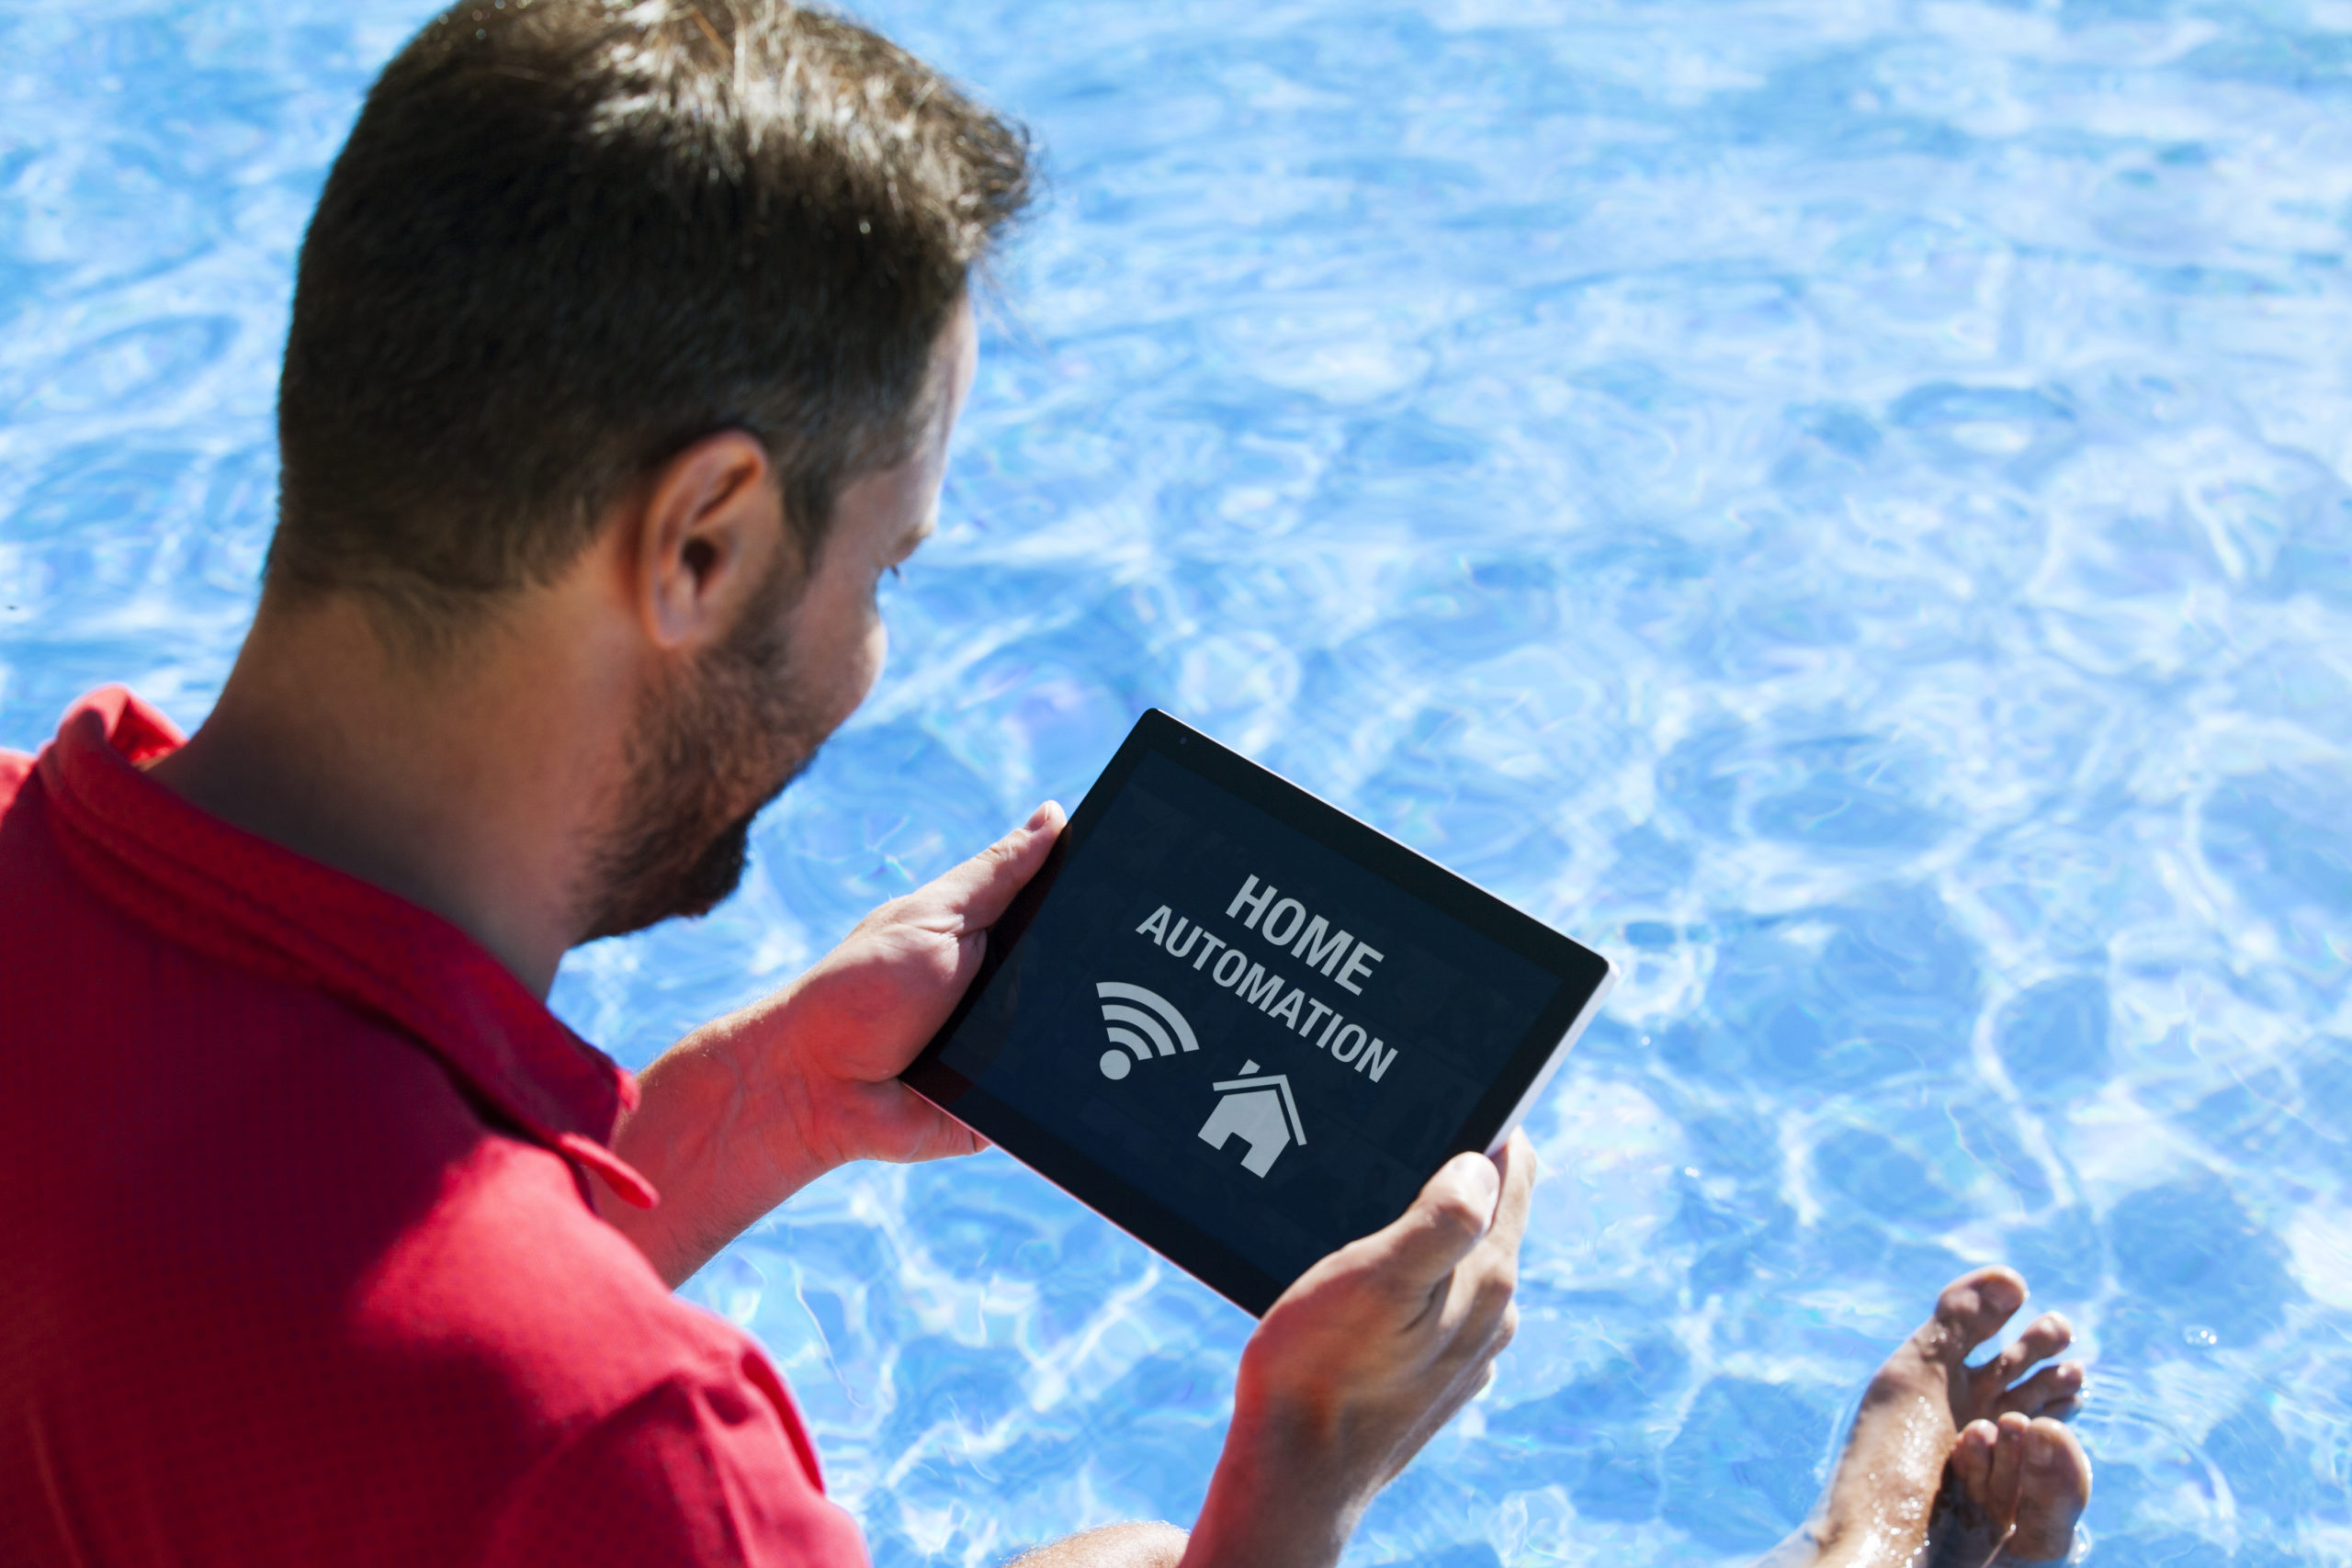 A smart device, such as a smartphone or tablet, being used to control and automate various functions of a swimming pool, including temperature, filtration, and lighting